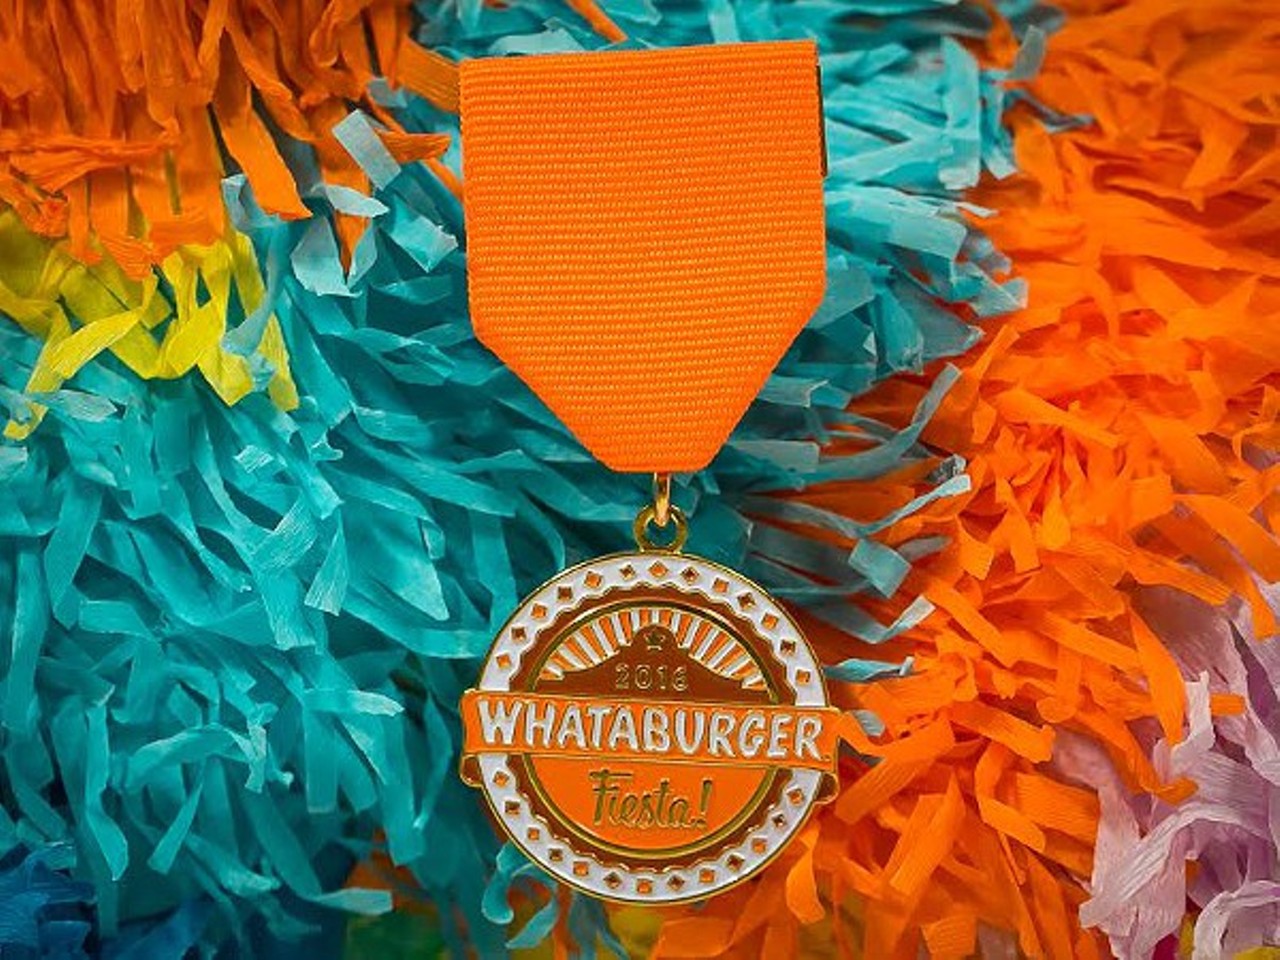 Whataburger 2016
Present this medal while drunk at 3am on a Saturday night at any San Antonio Whataburger and demand a free Honey Butter Chicken Biscuit! (Not official but if it works you can thank us later.)